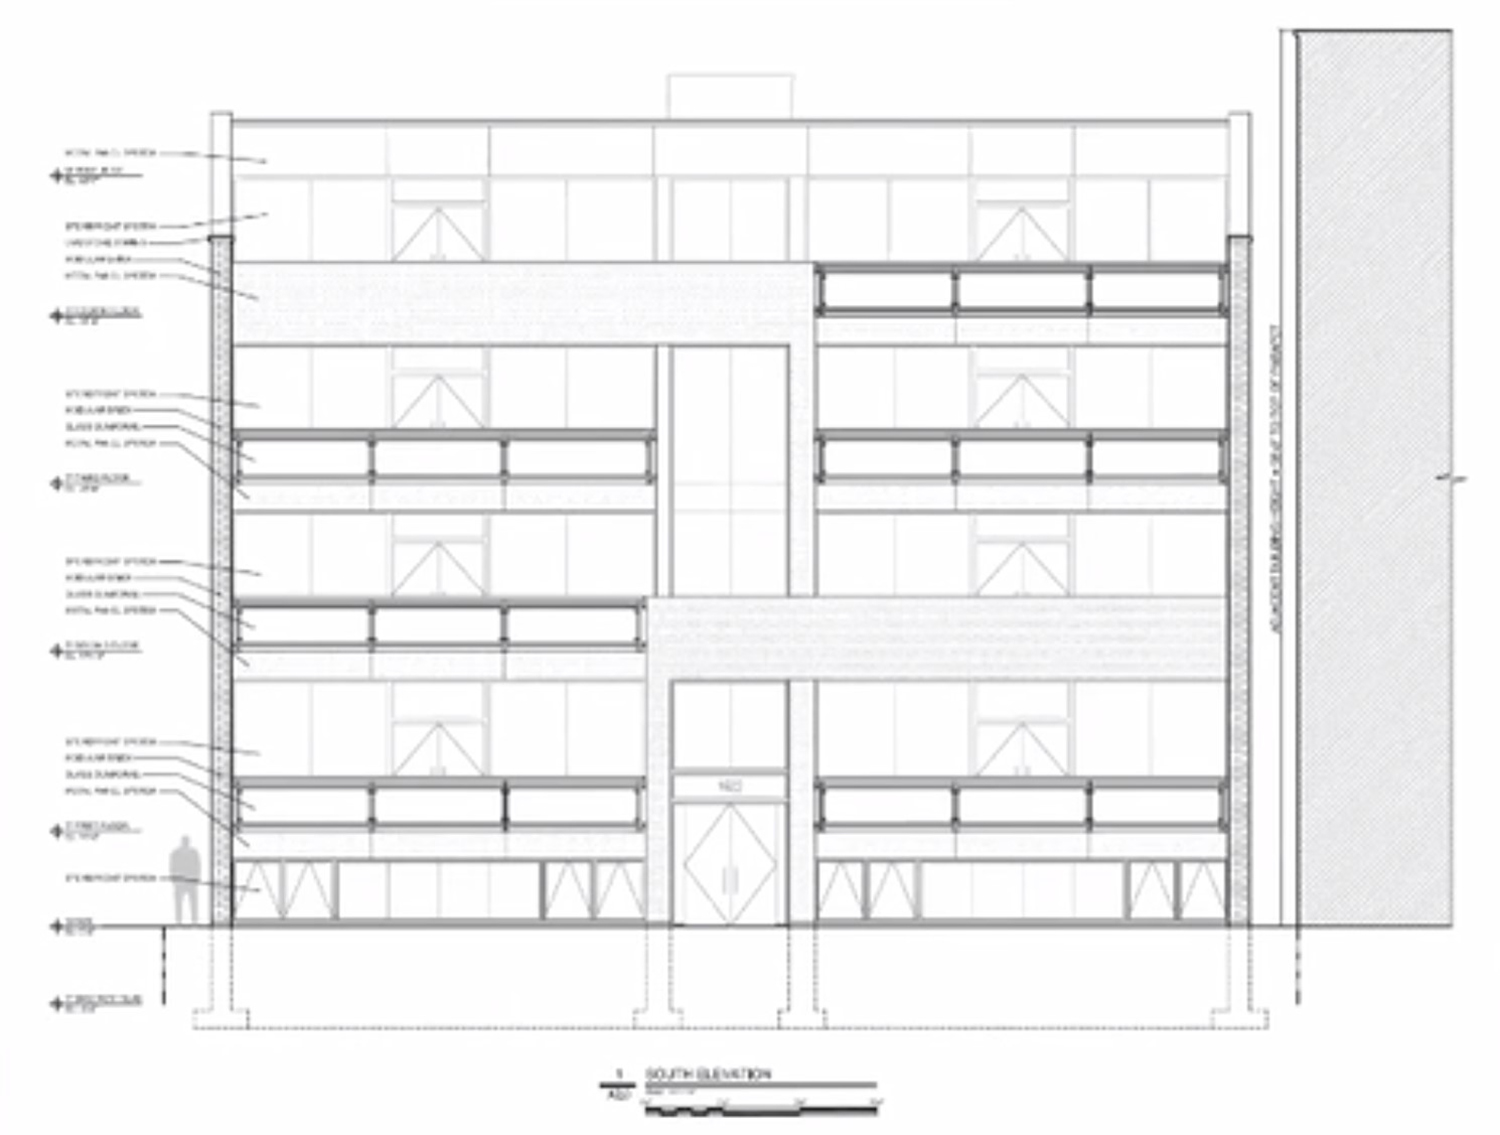 South Elevation for 1620 W Grand Avenue. Drawings by Axios Architects and Consultants